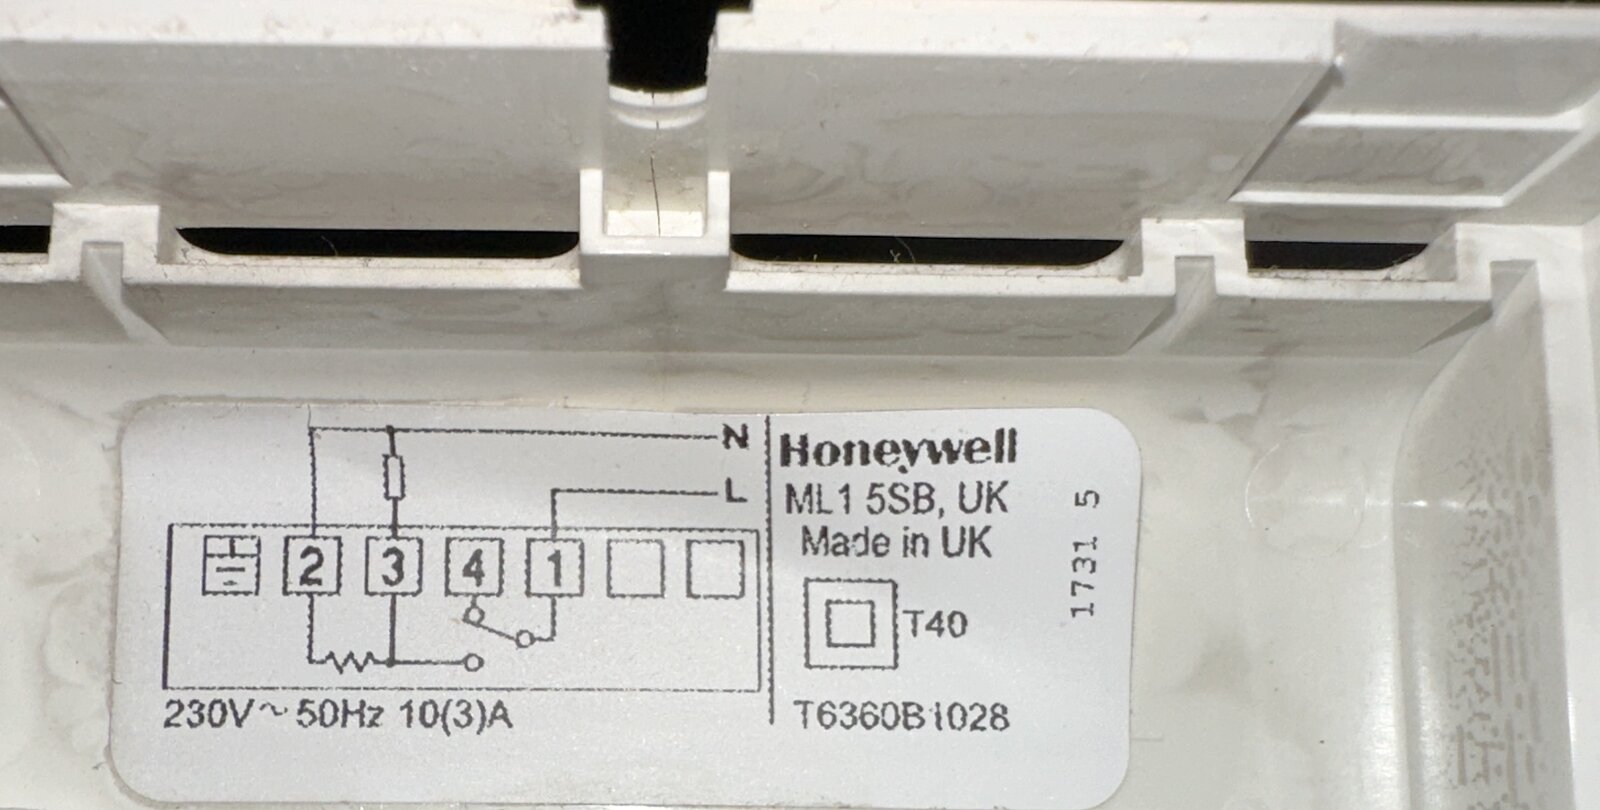 A sticker that is displaying the wiring diagram for the Honeywell thermostat